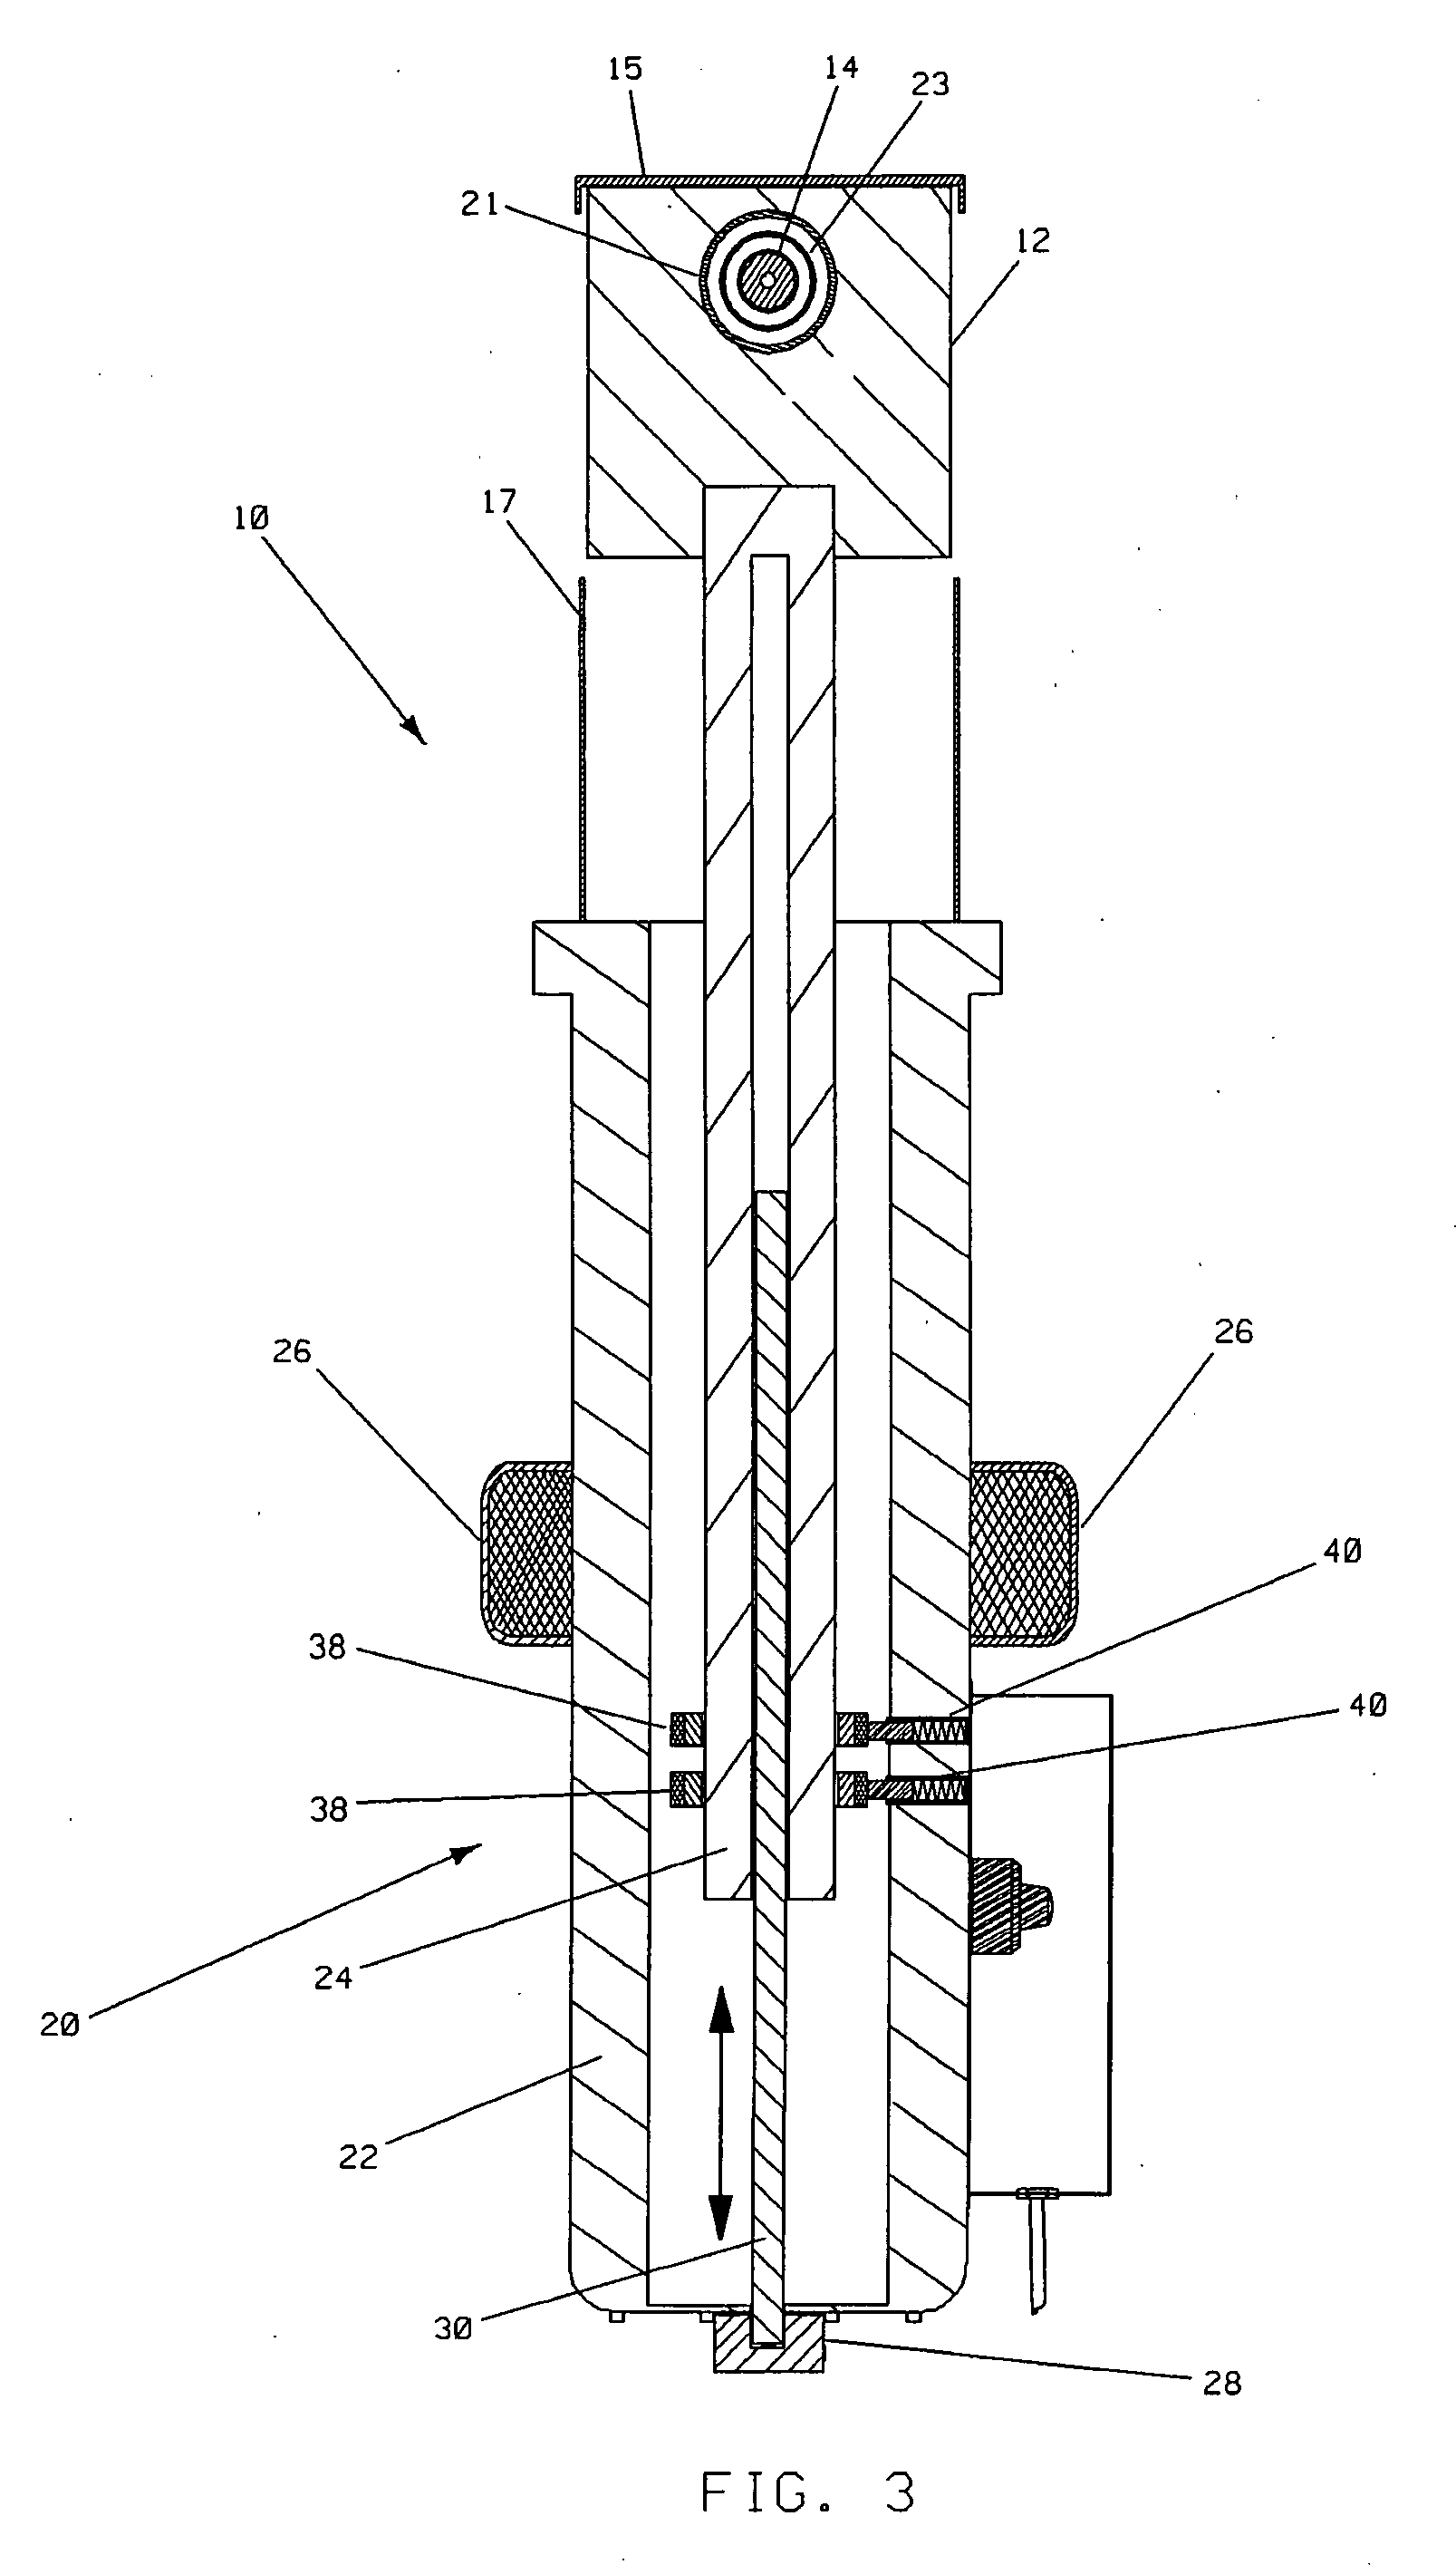 Apparatus and method for cutting lawns using lasers